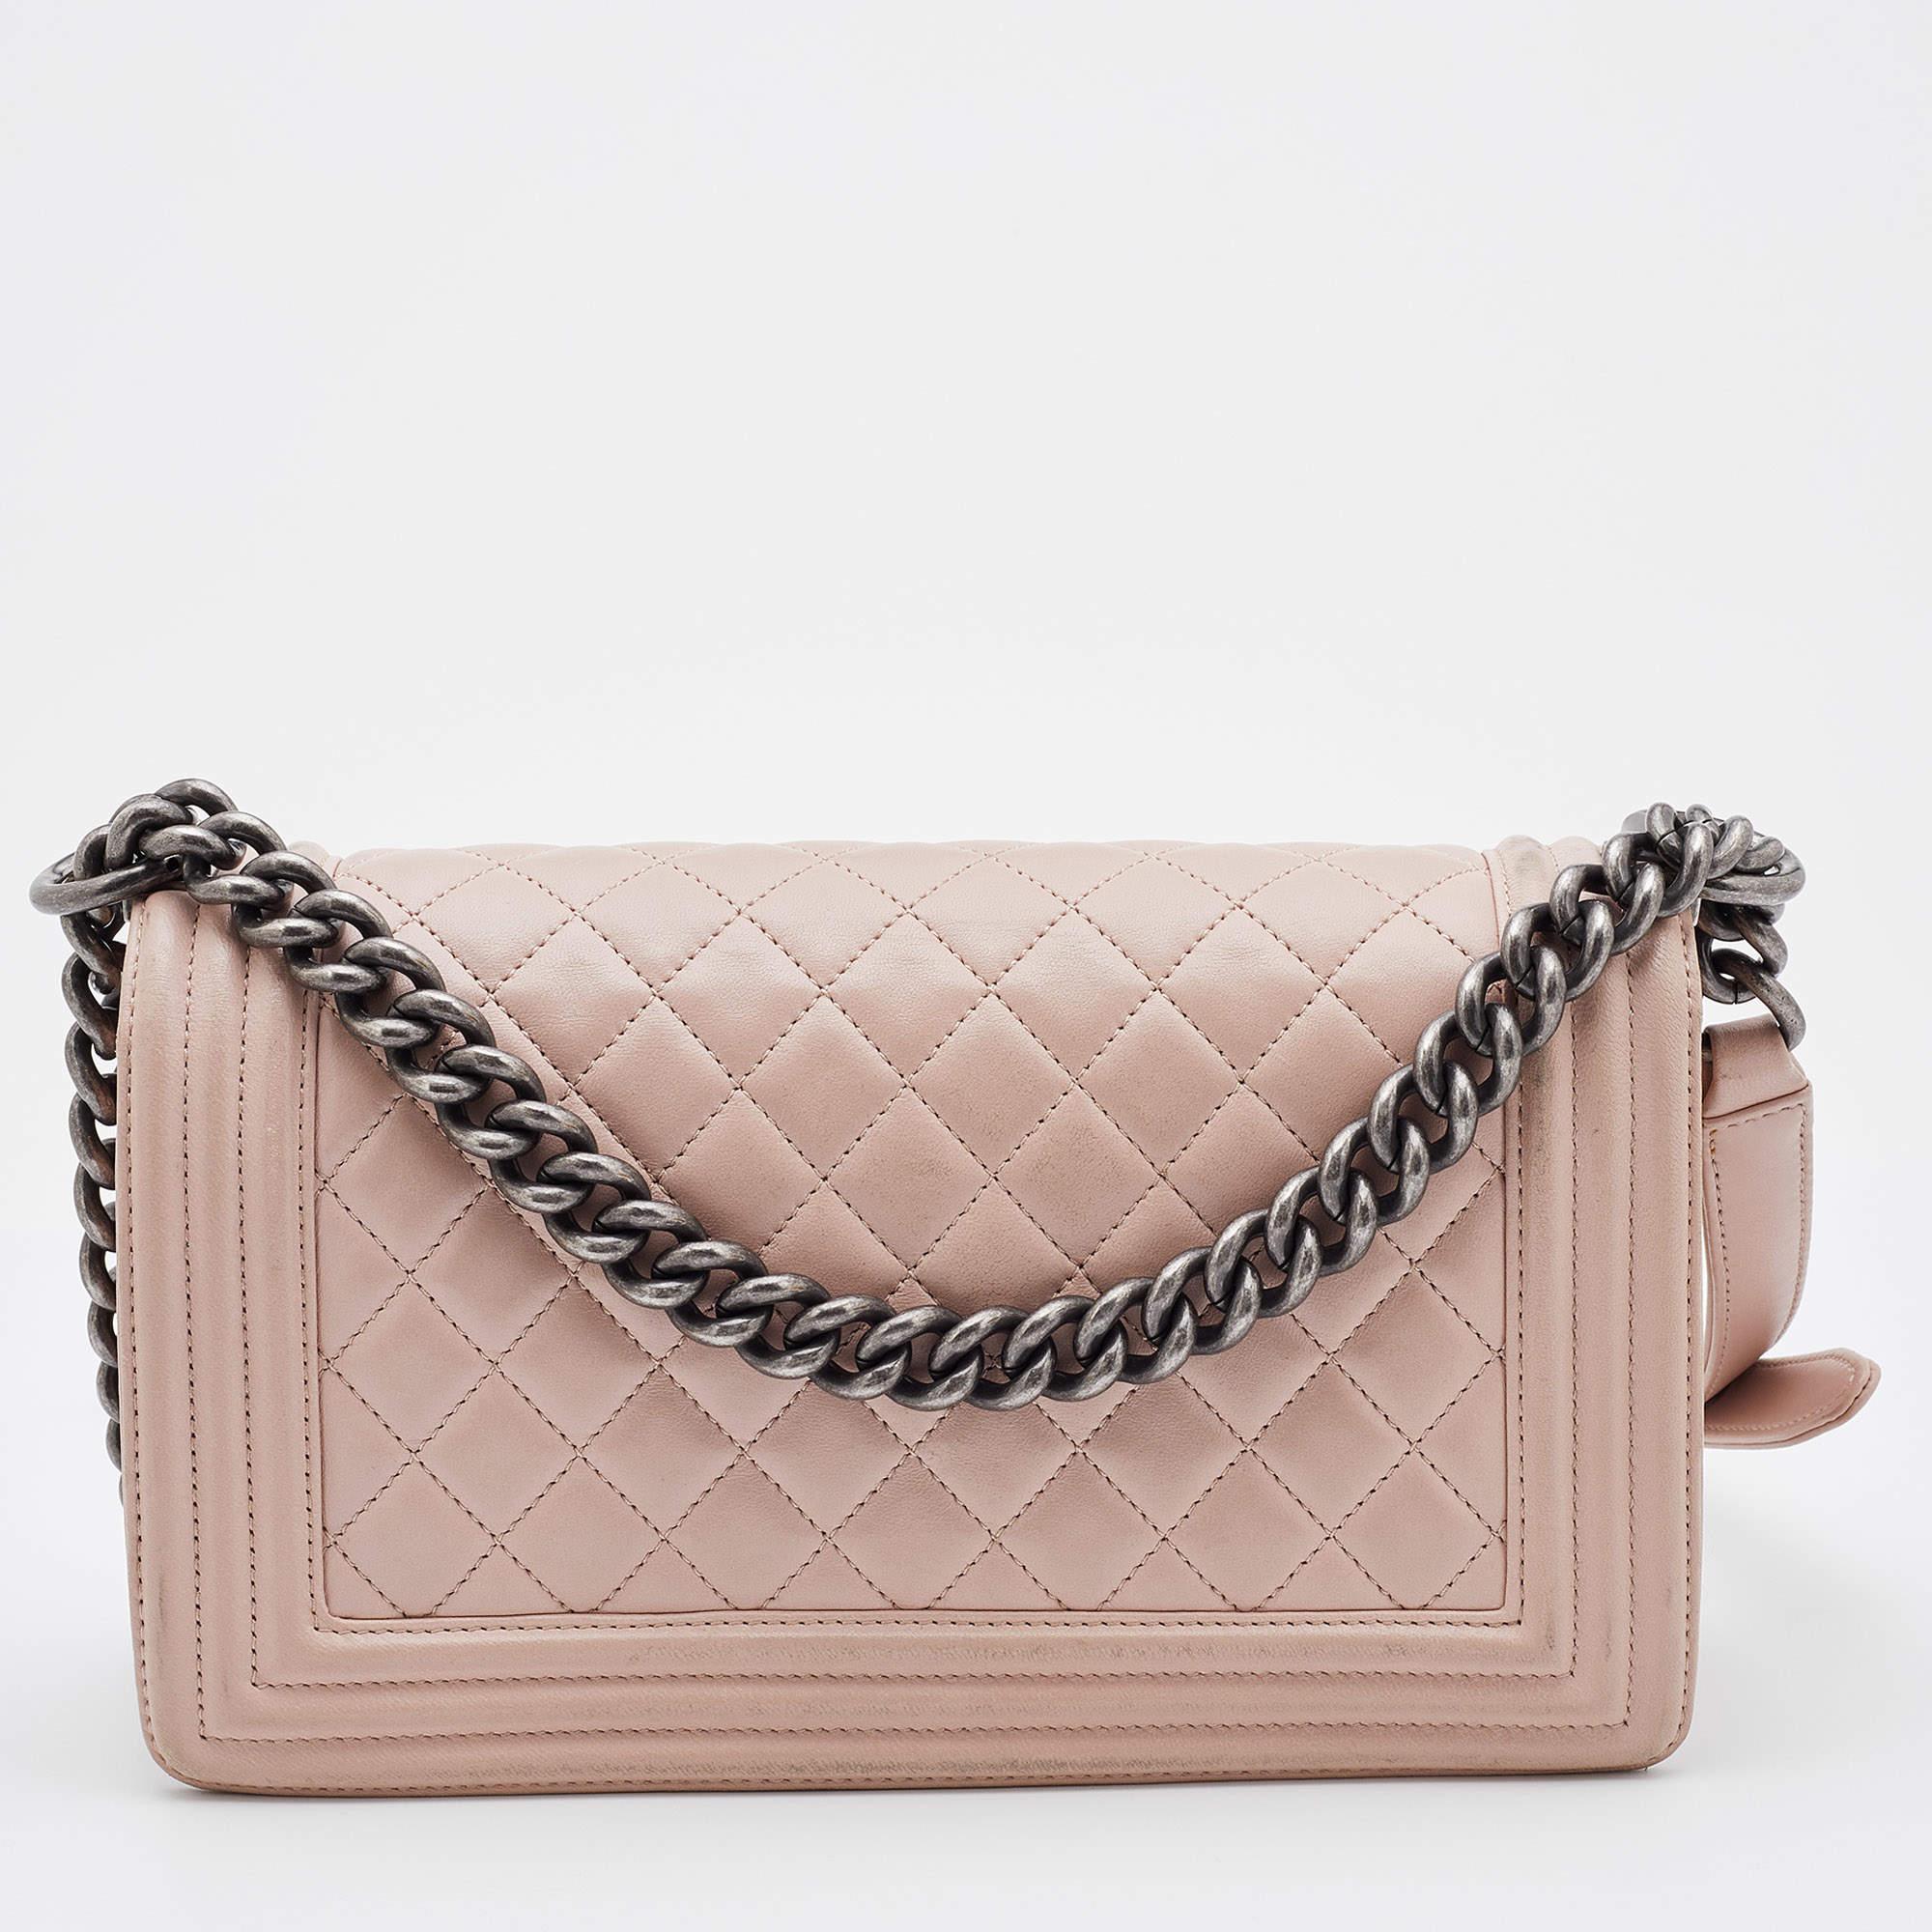 Chanel's Flap bags are iconic and noteworthy in the history of fashion. Hence, this one is a buy that is worth every bit of your splurge. Exquisitely crafted, it bears the signature elements of the house. This creation is the ultimate day-to-night